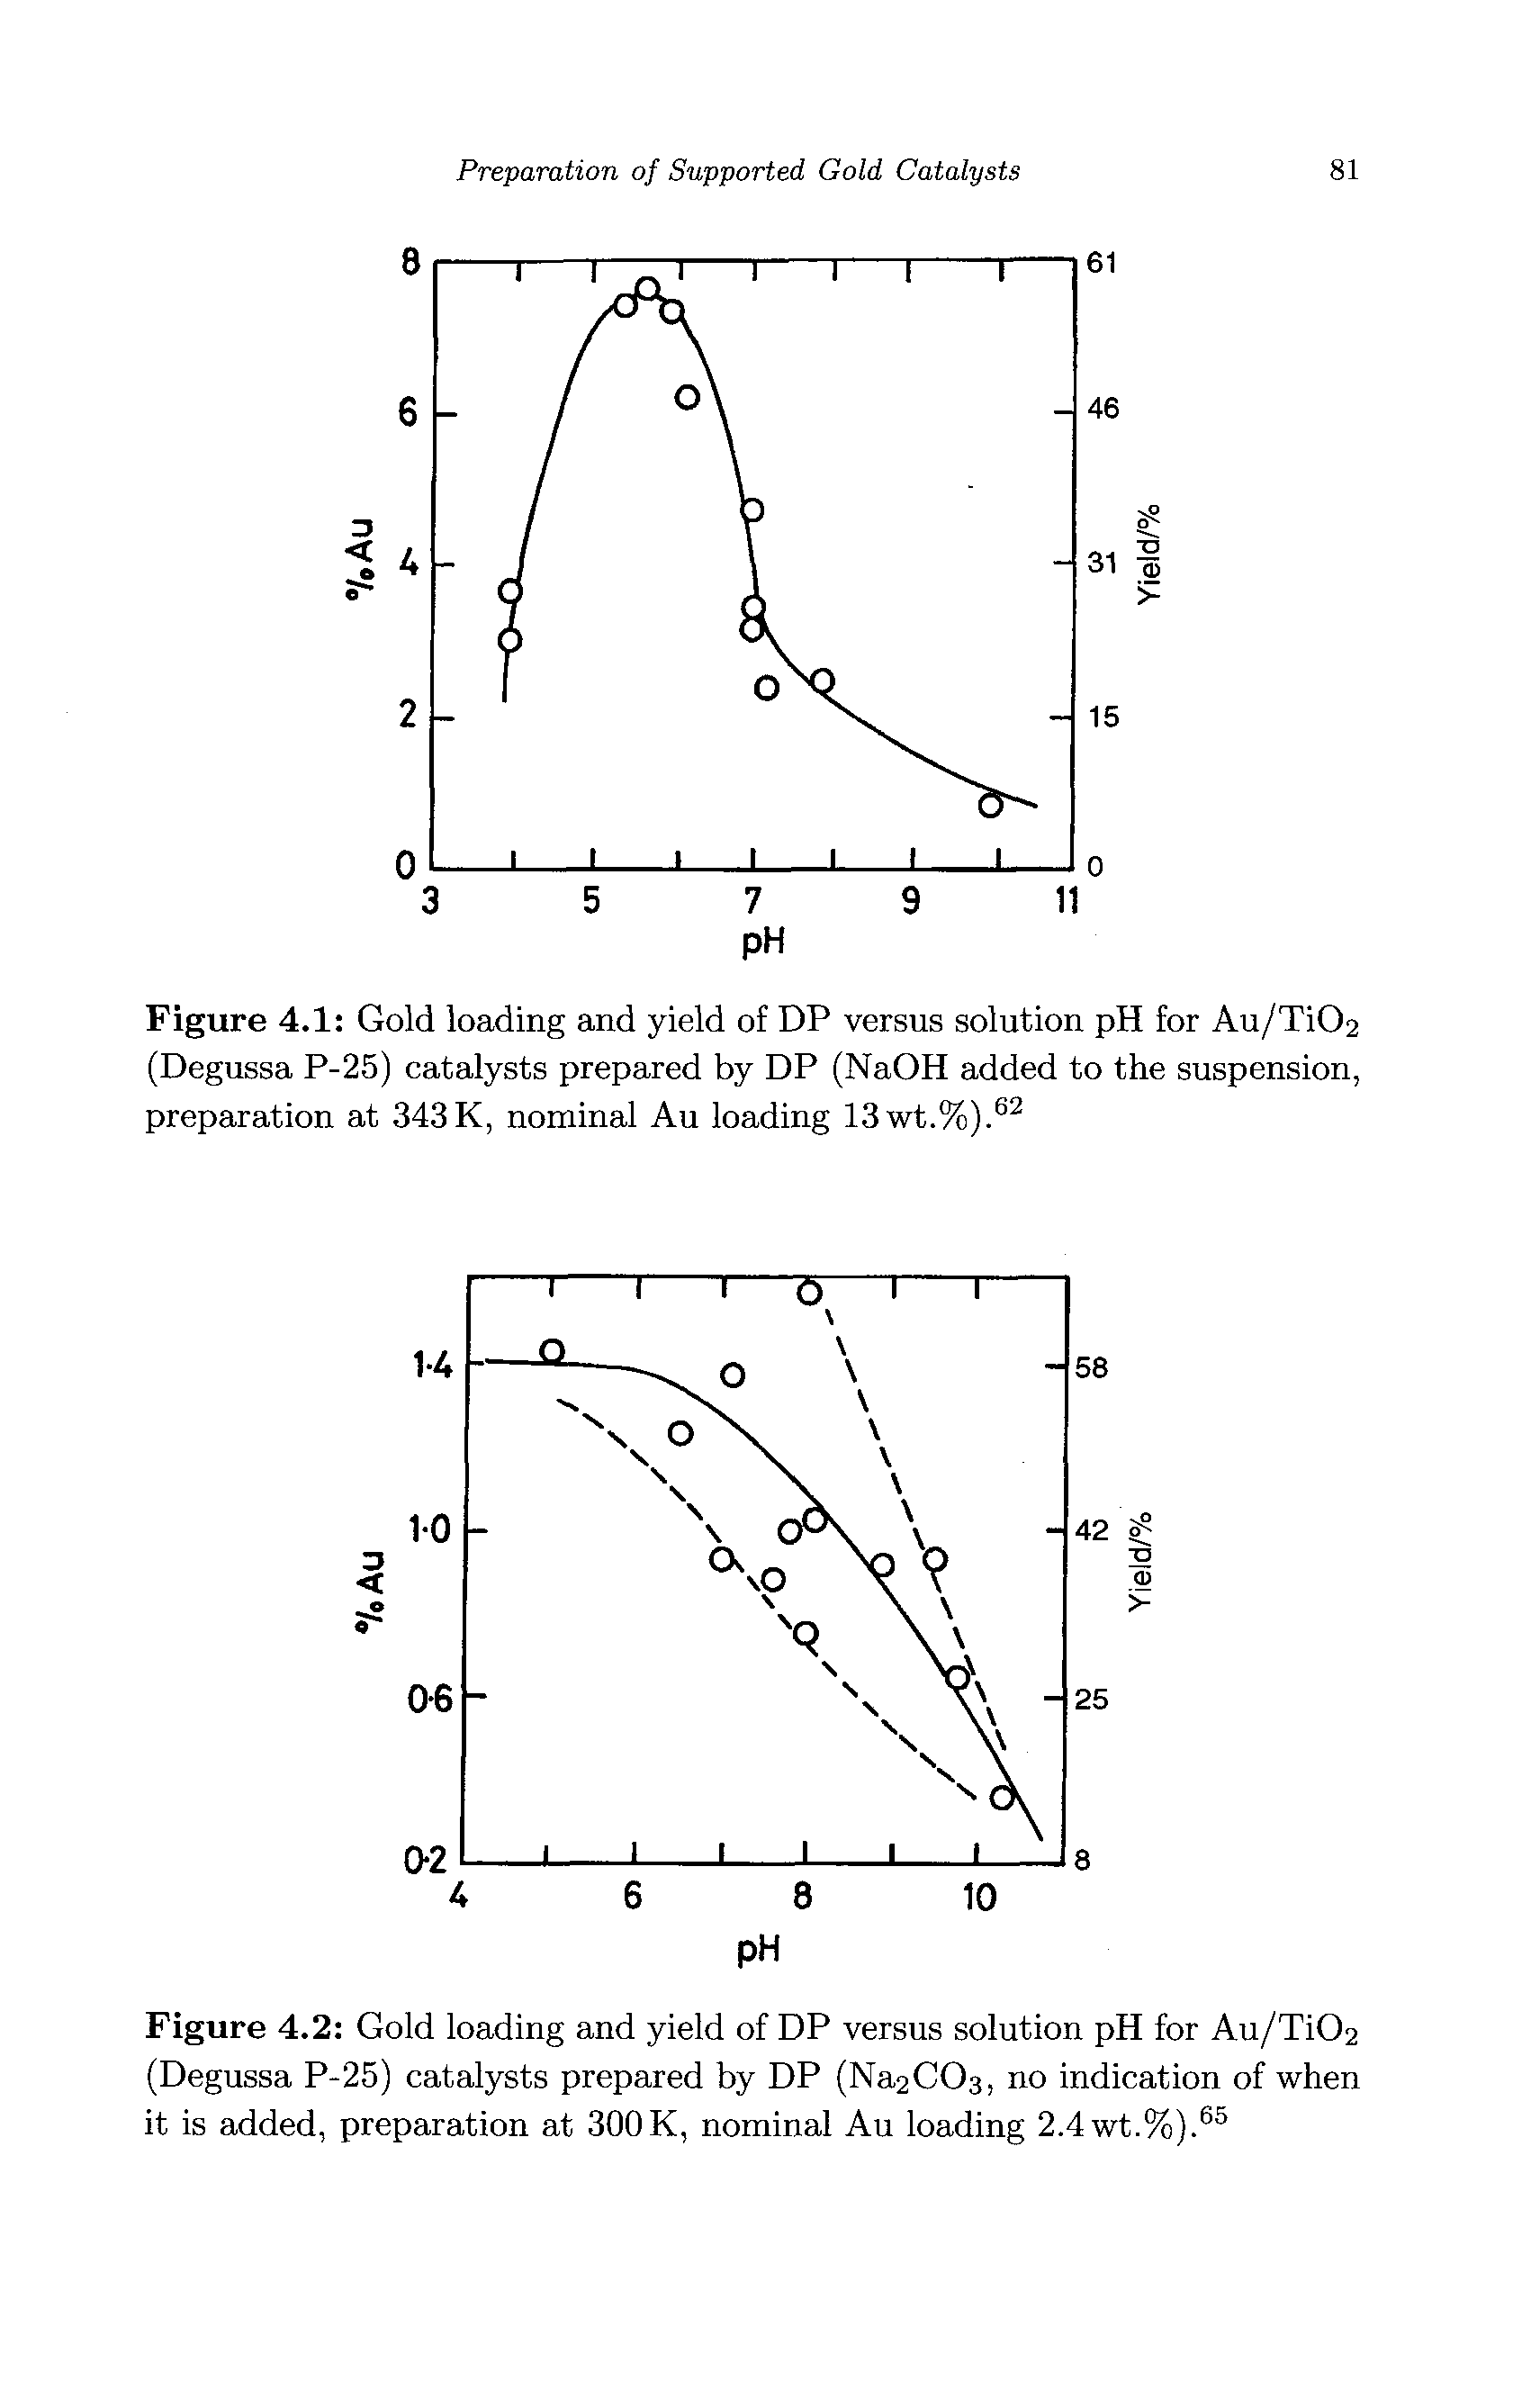 Figure 4.1 Gold loading and yield of DP versus solution pH for Au/Ti02 (Degussa P-25) catalysts prepared by DP (NaOH added to the suspension, preparation at 343K, nominal Au loading 13wt.%).62...